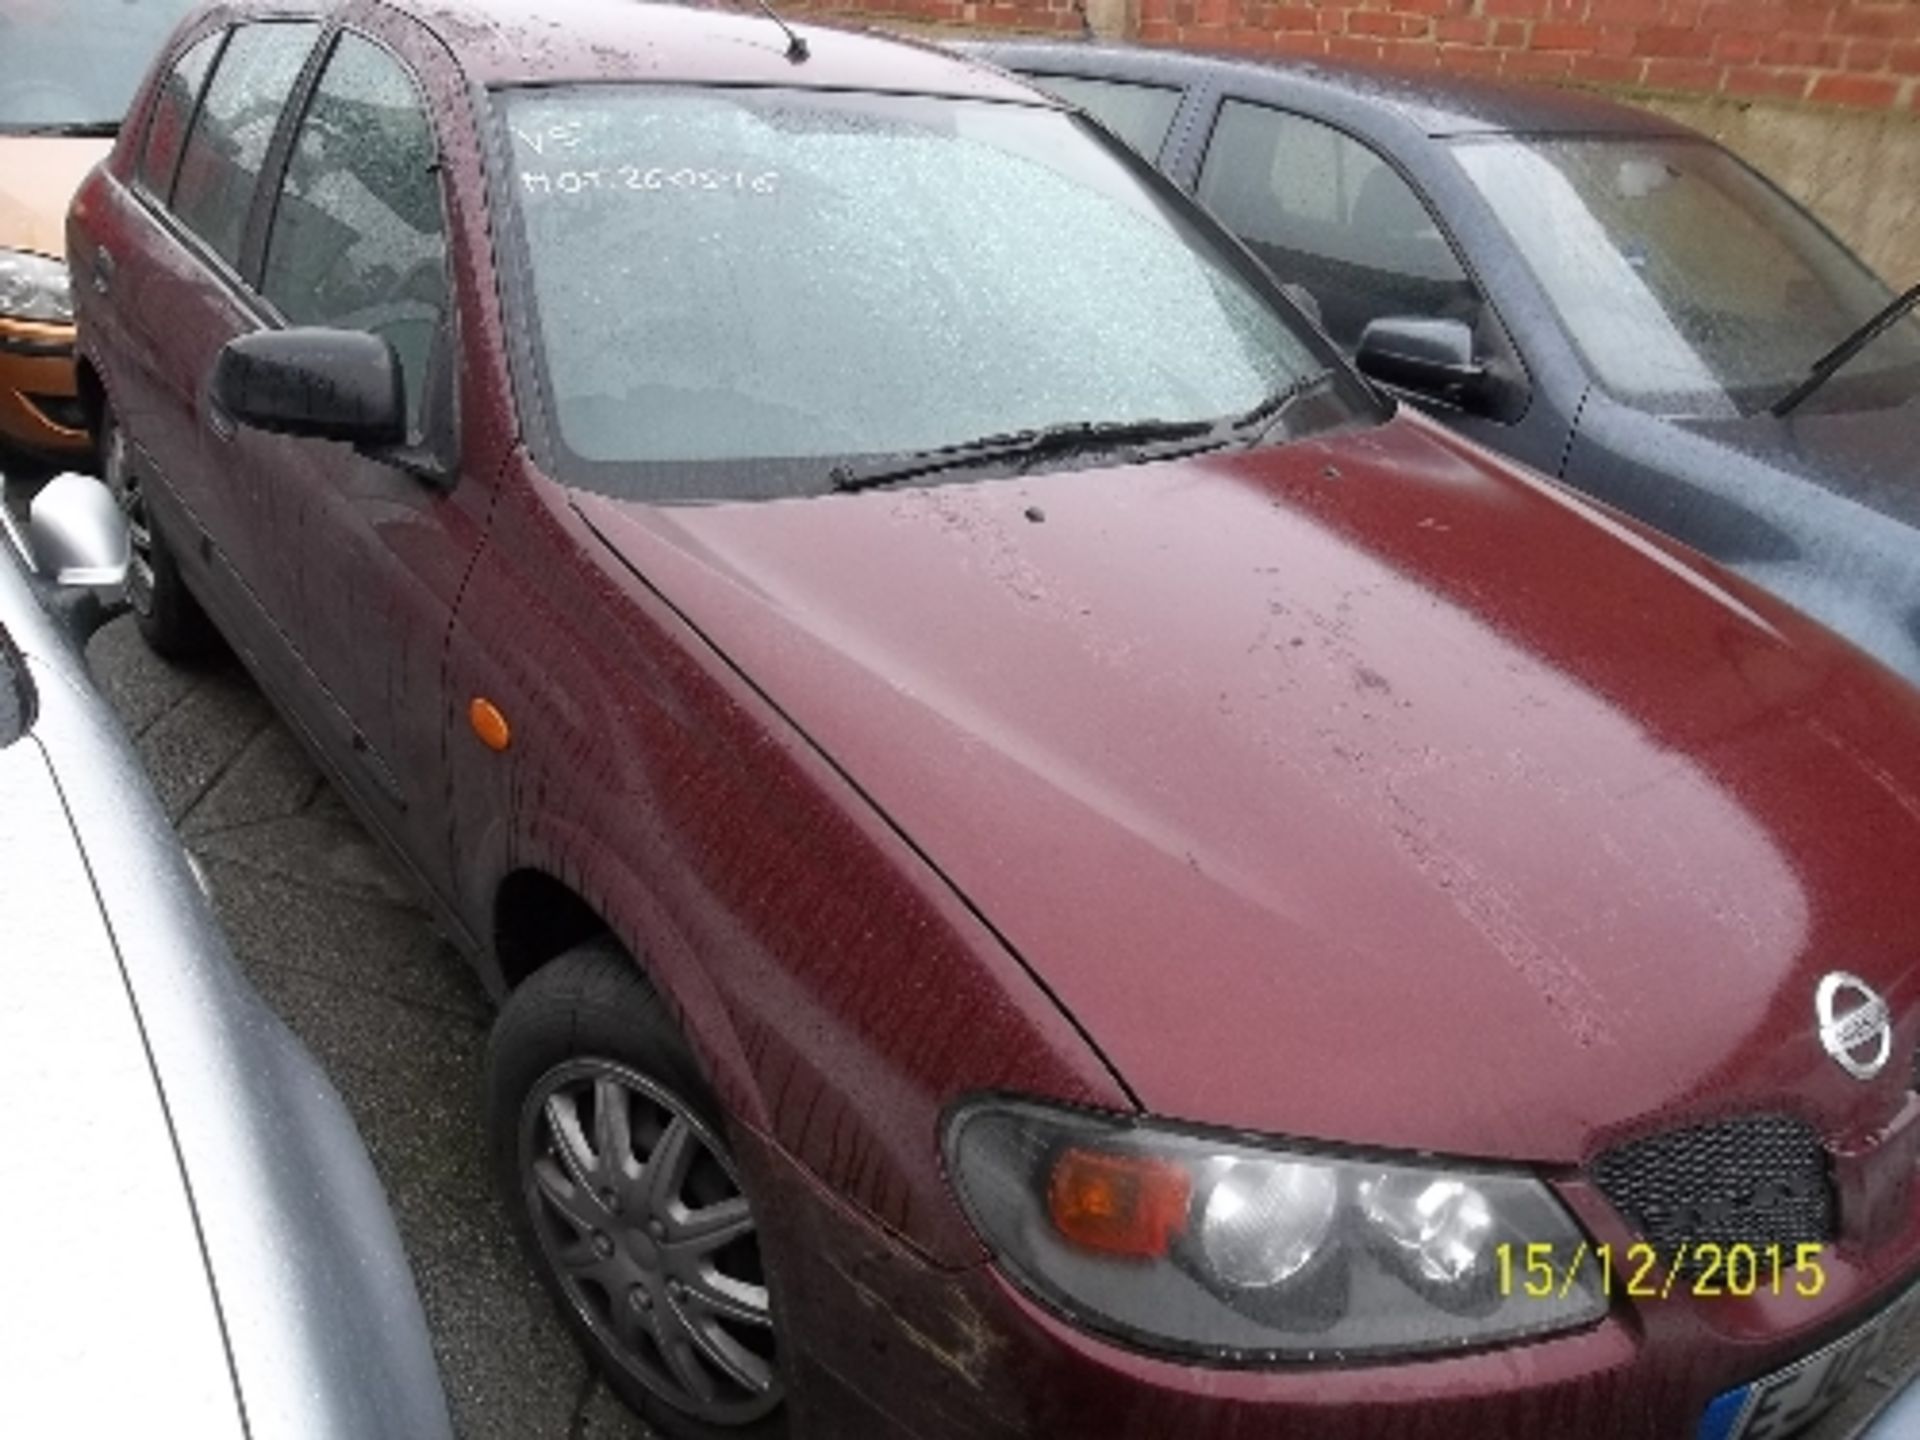 Nissan Almera S - EJ03 CLN  Date of registration:  22.04.2003 1769cc, petrol, automatic, red - Image 2 of 4